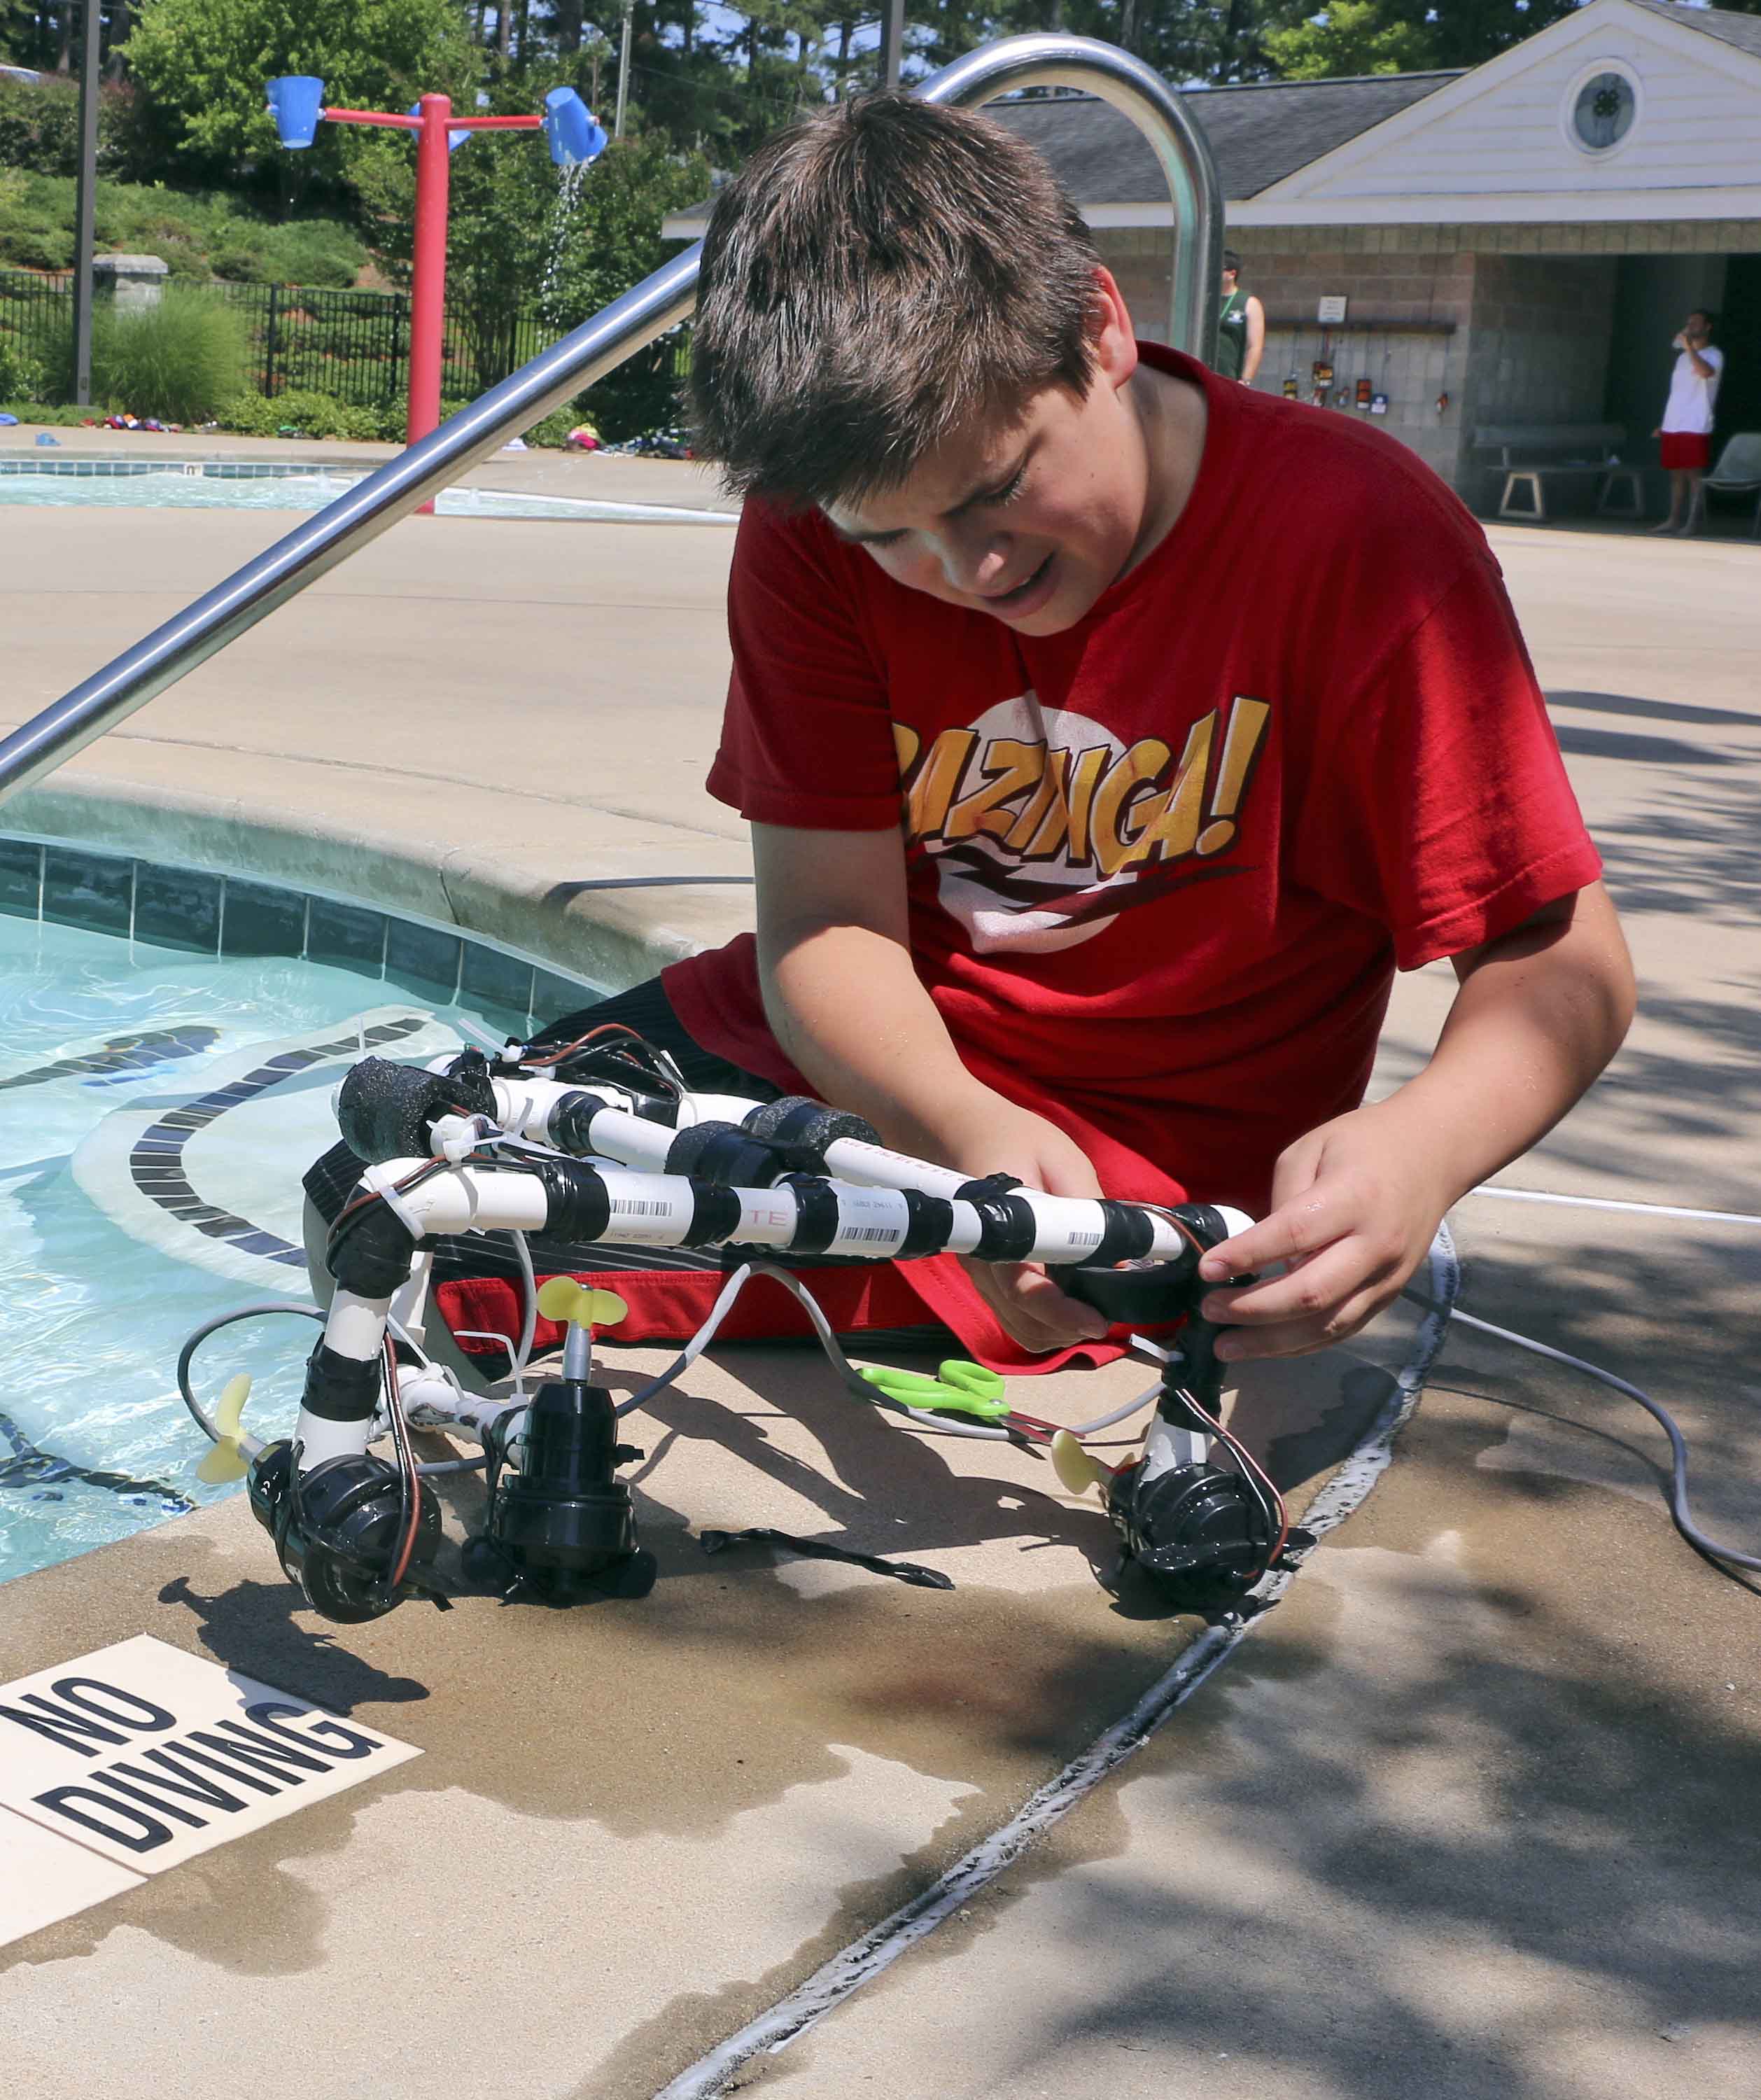 Echols County 4-H'er Brent Mashburn works on his team's ROV during Georgia 4-H's HughesNet Tech Takeover Day in June. Two of his team-mates, Brooks County 4-H'ers Chris Spires and Jack Perry, wait to try out the robots modifications.